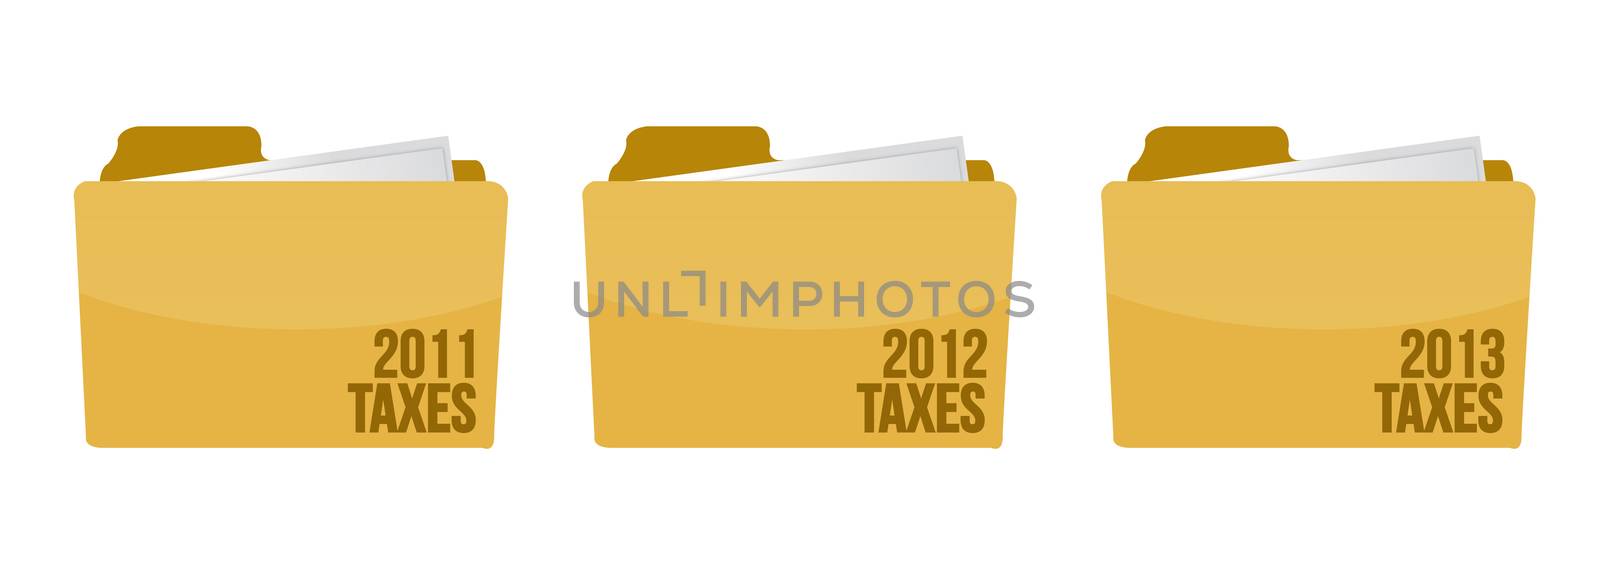 folder with tax documents illustration design over white